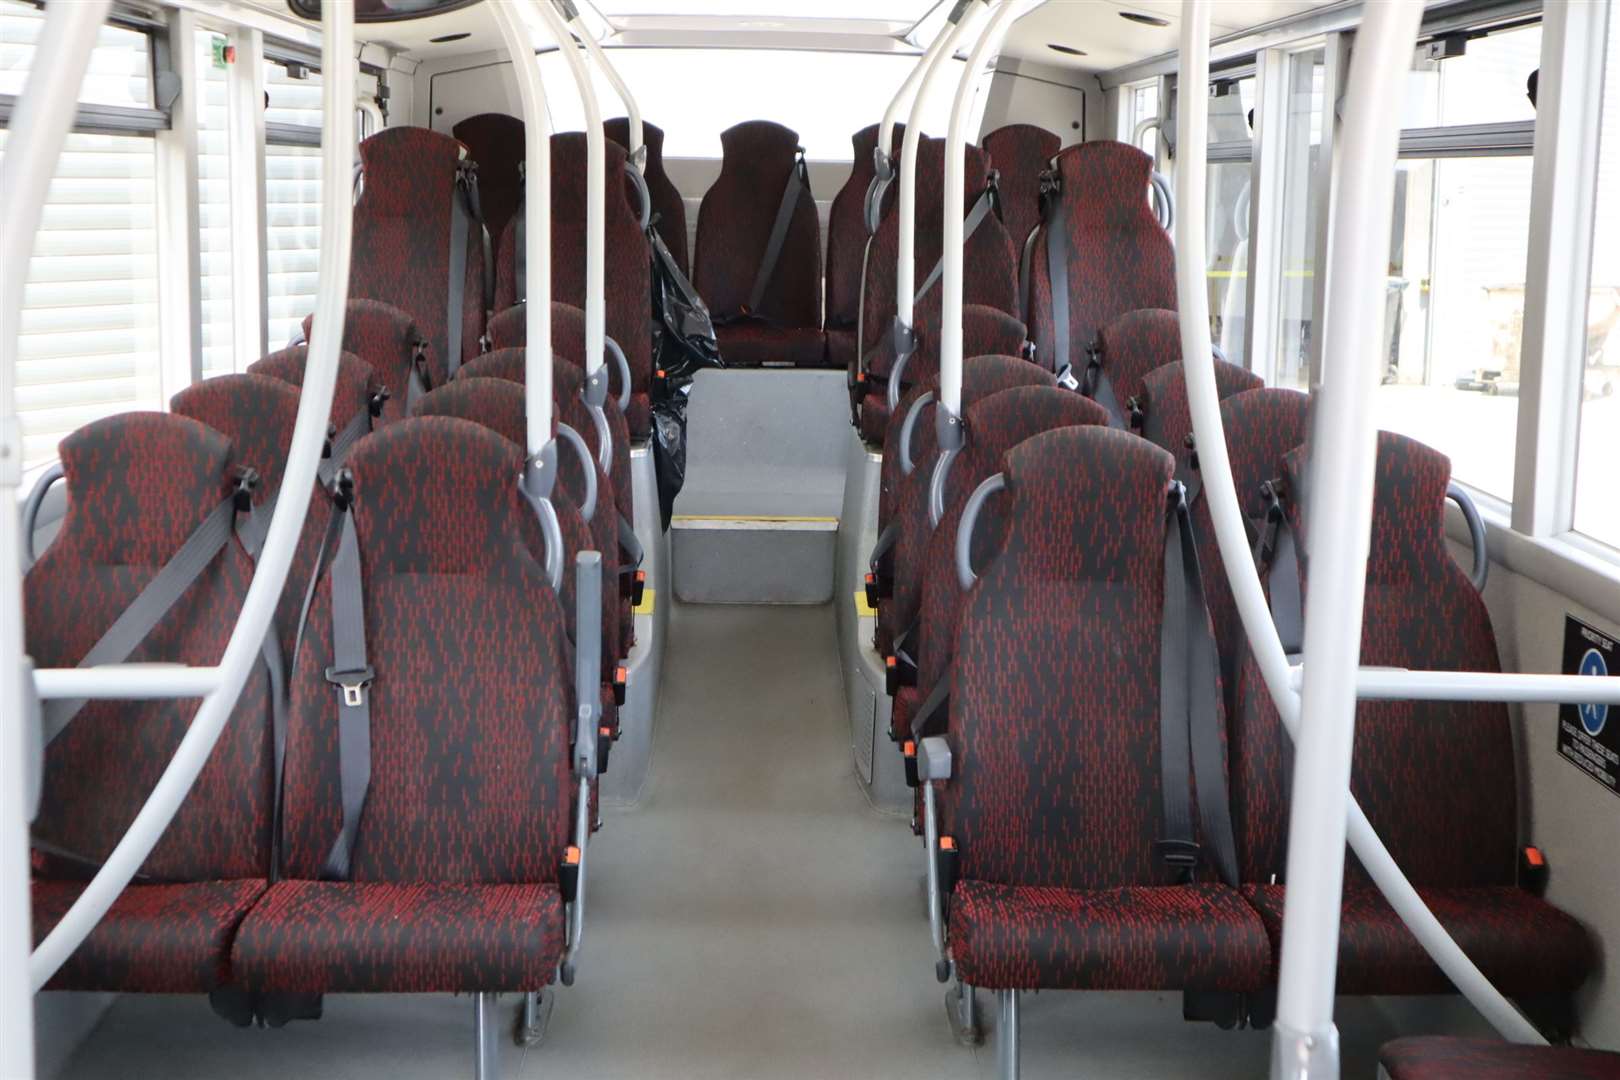 Inside a Travelmasters bus